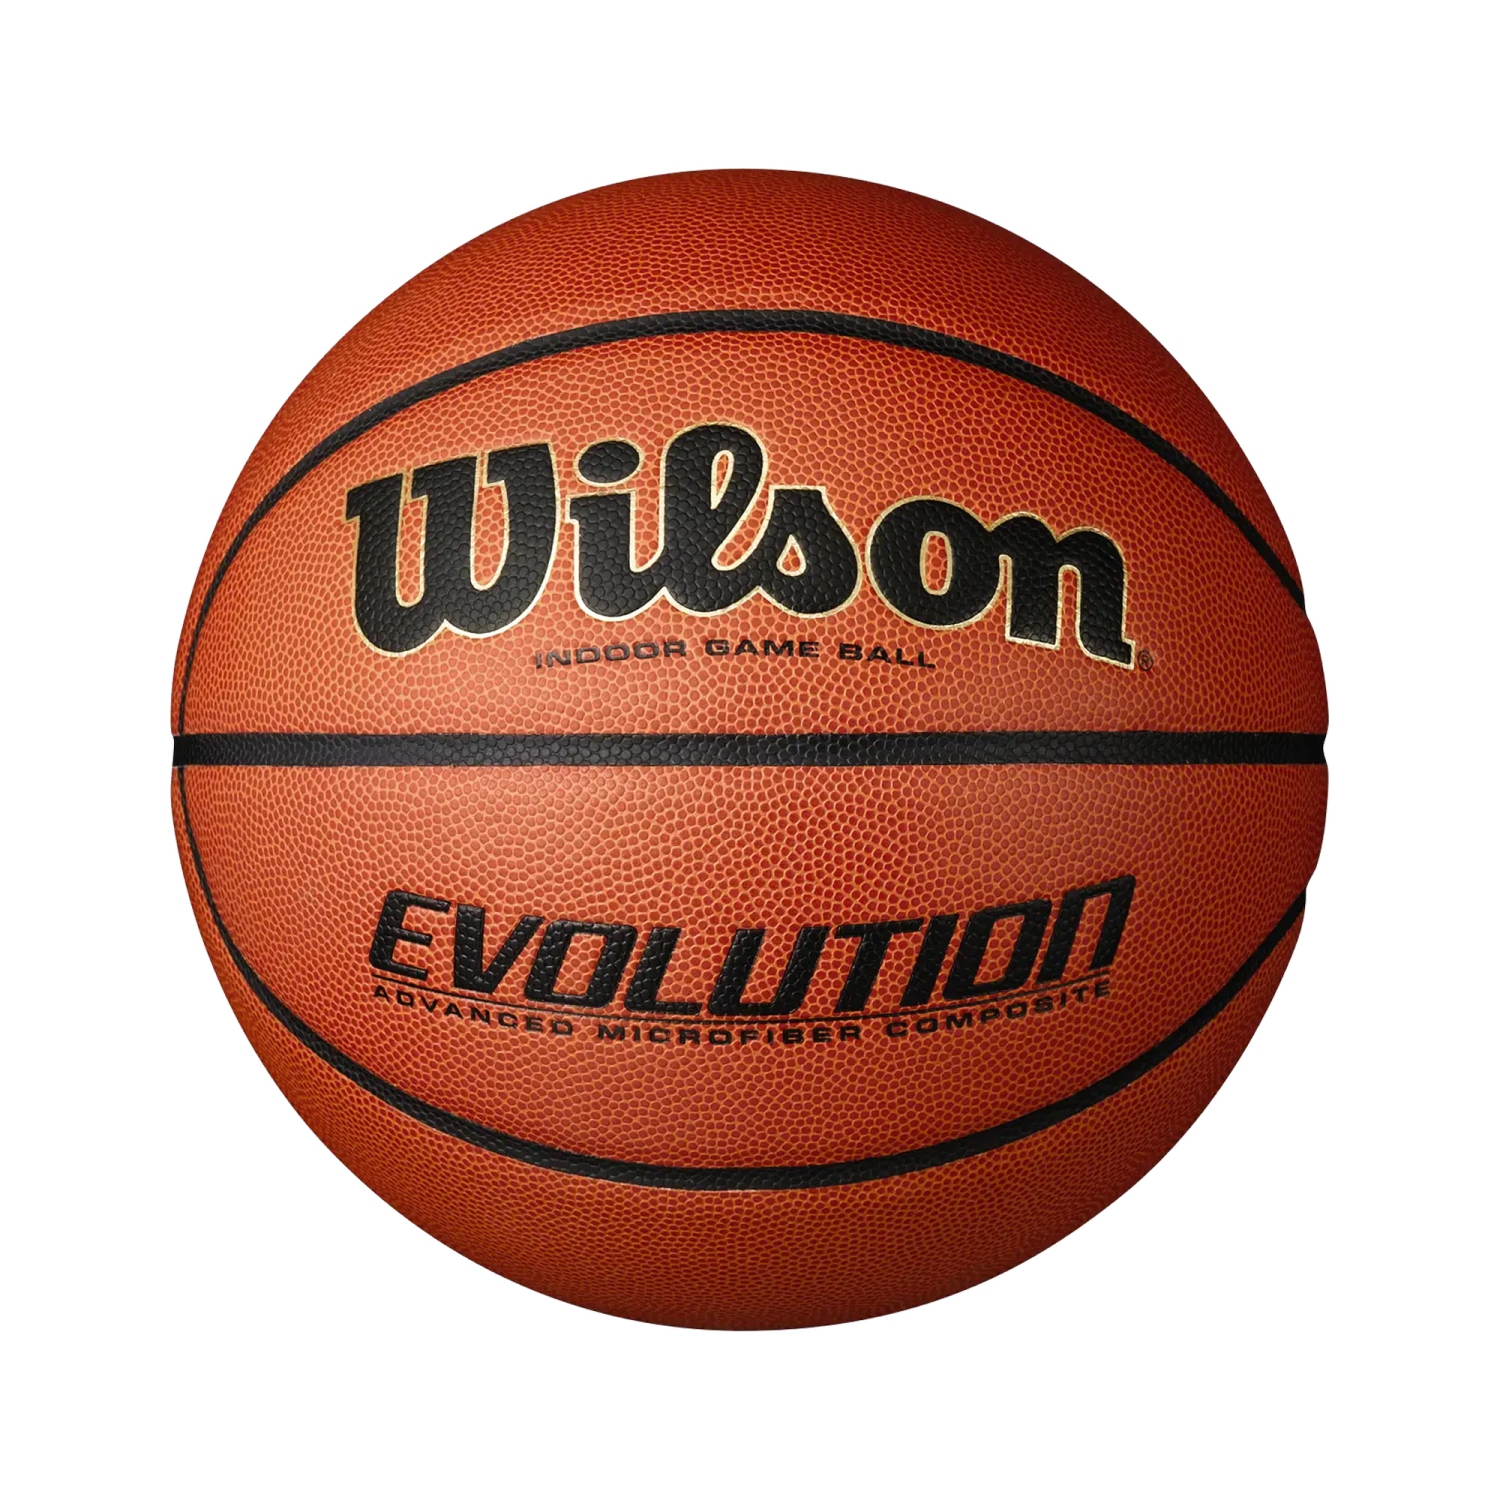 Wilson EVOLUTION Indoor Game Basketball - NFHS Approved Ball, Official Size 7